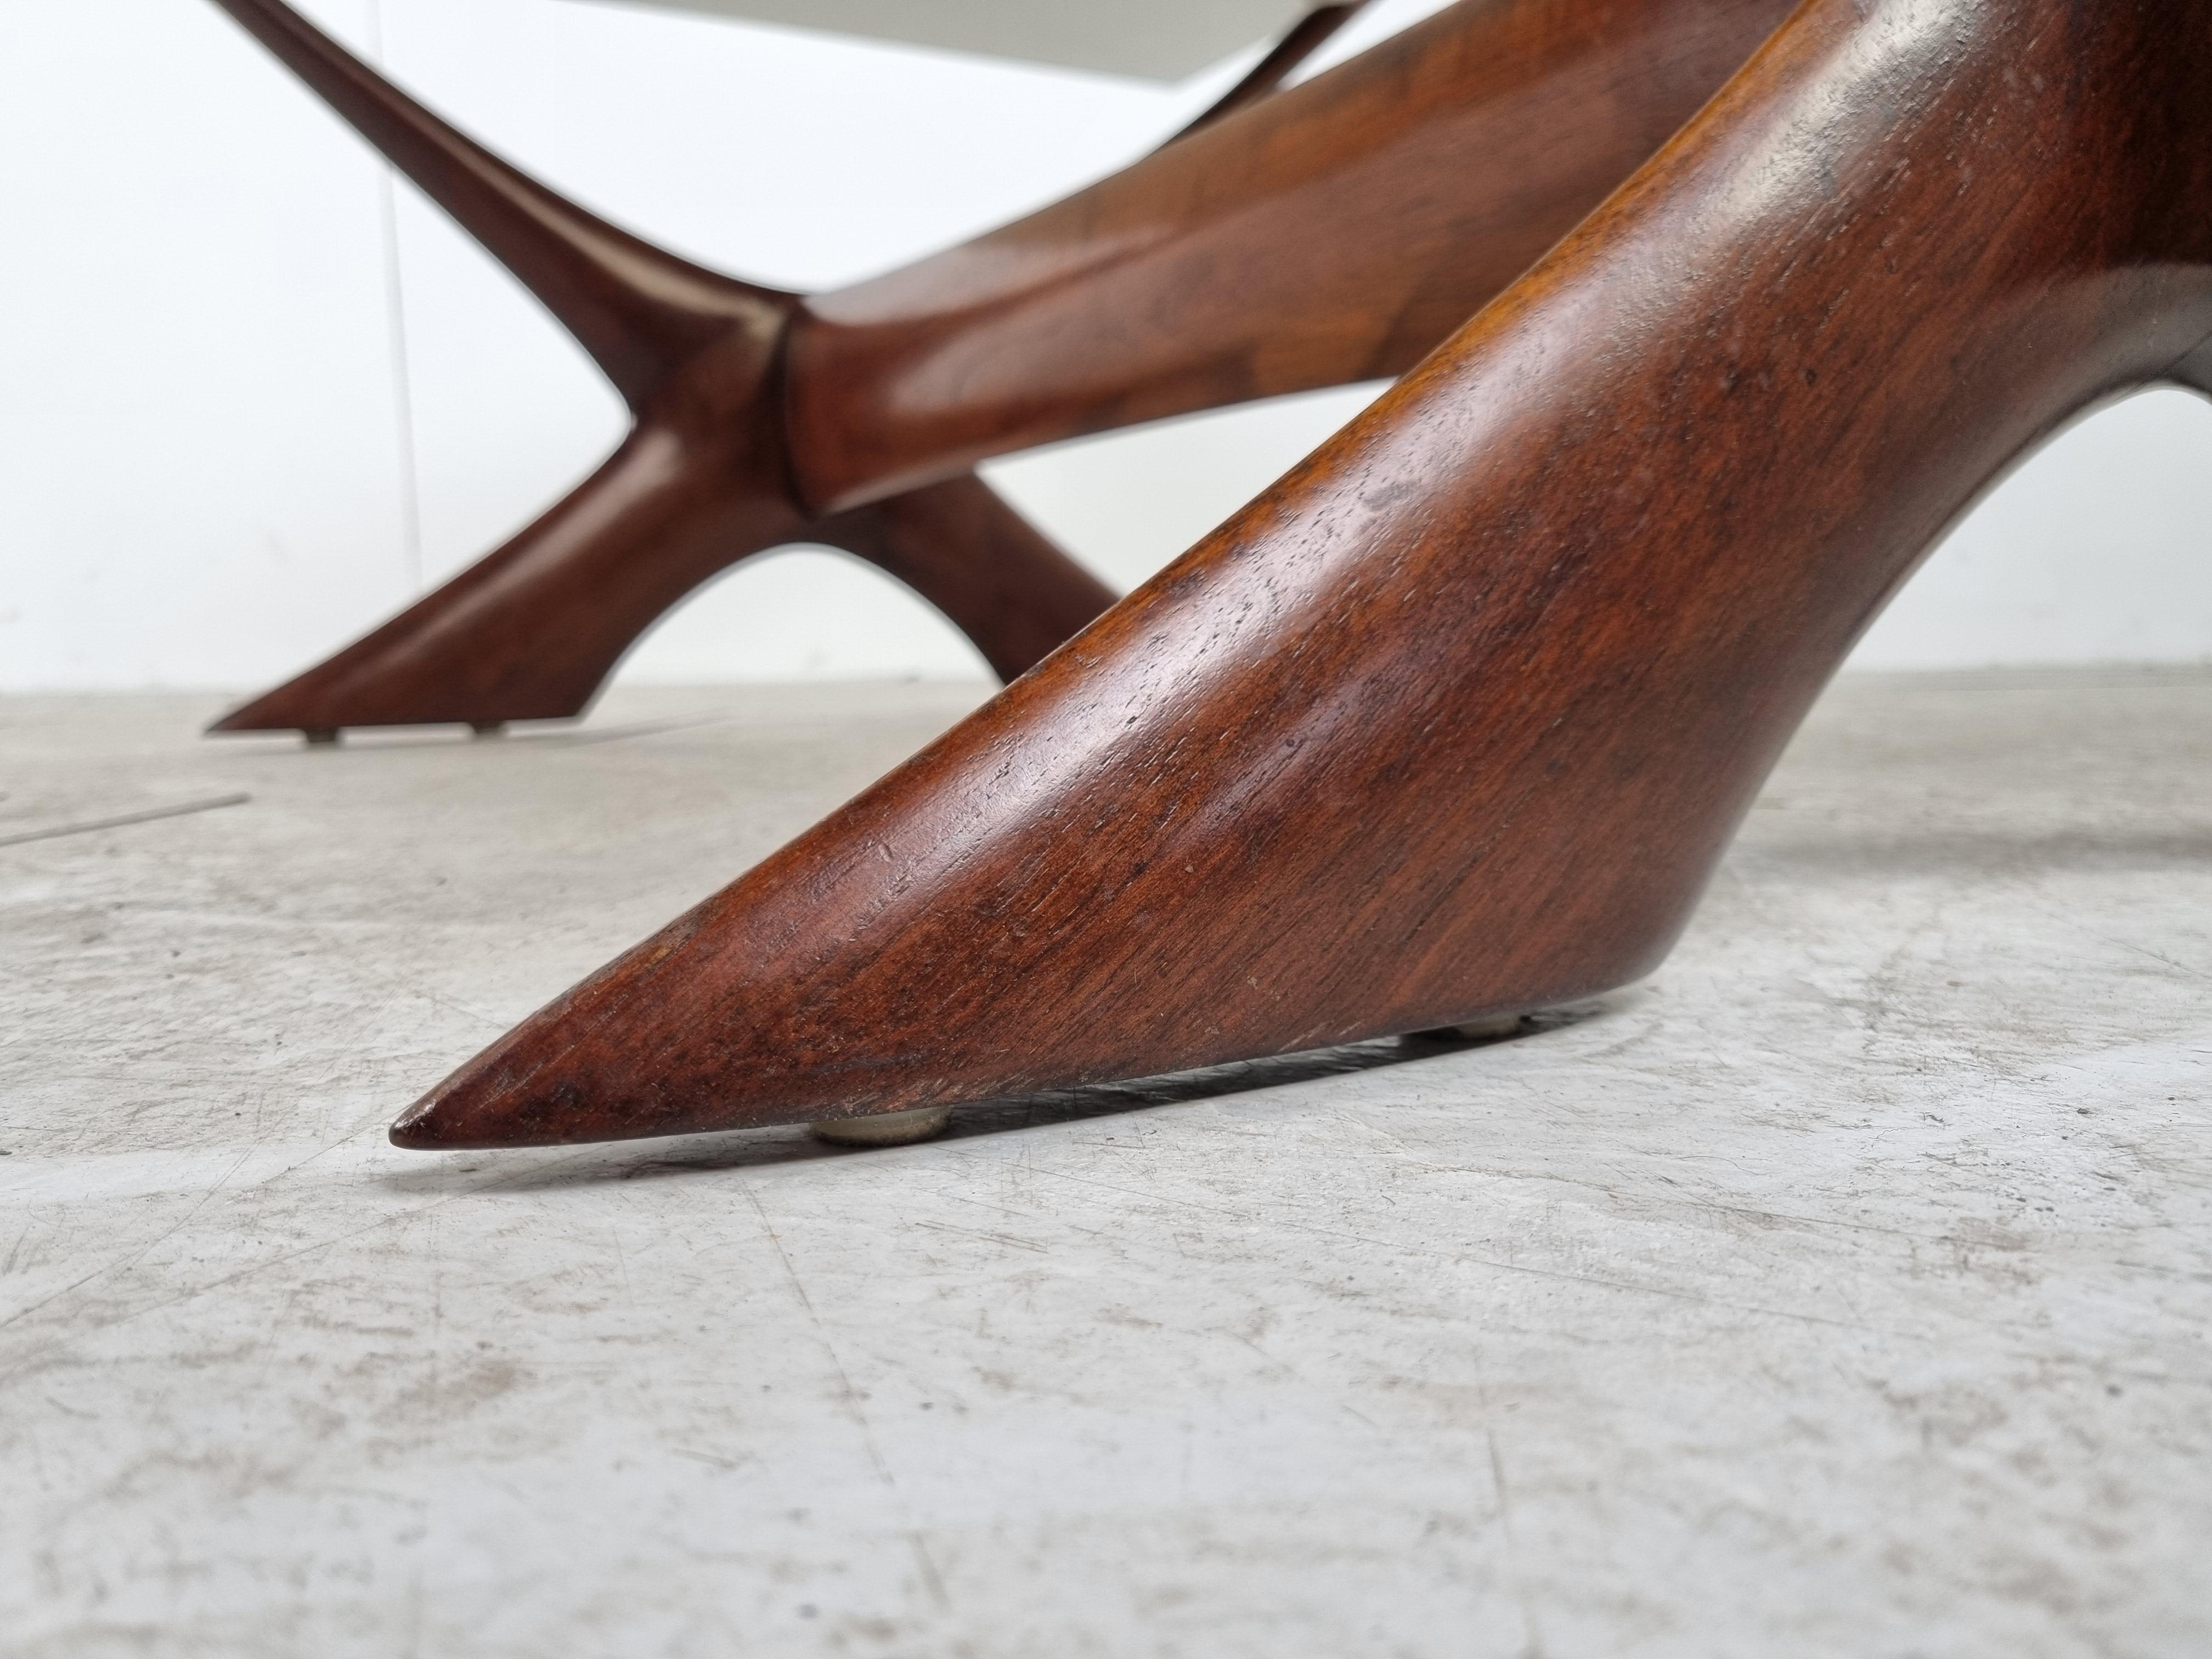 Spectacular mid century coffee table designed by Fredrik Schriever-Abeln for the swedish company Örebro Glasfabrik.

The table is beautiful to look at from every angle and features a beautifully made teak frame and smoked glass top.

1960s -